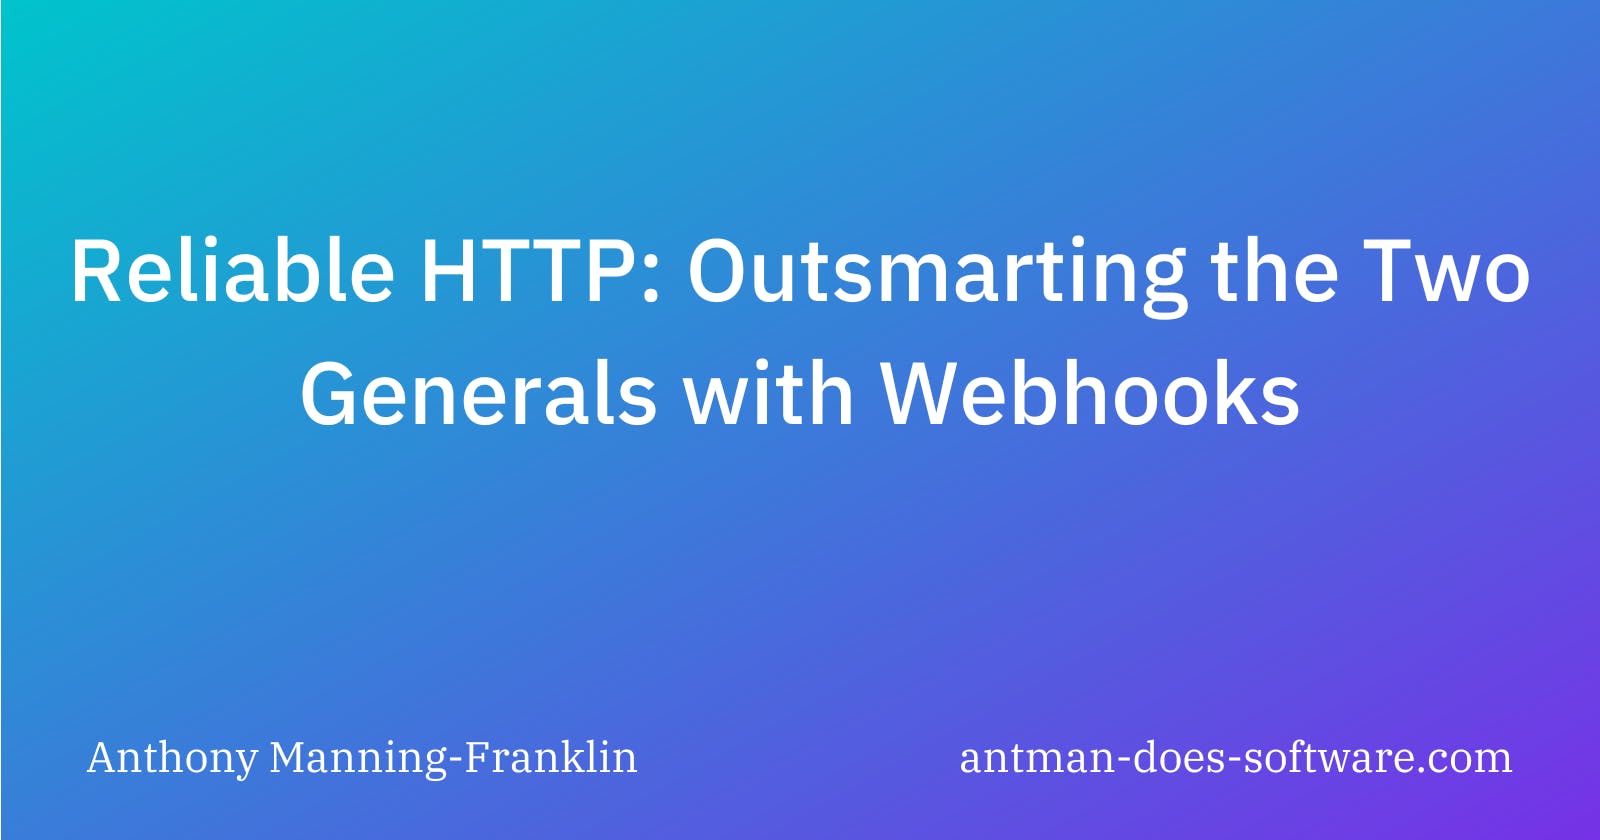 Reliable HTTP: Outsmarting the Two Generals with Webhooks